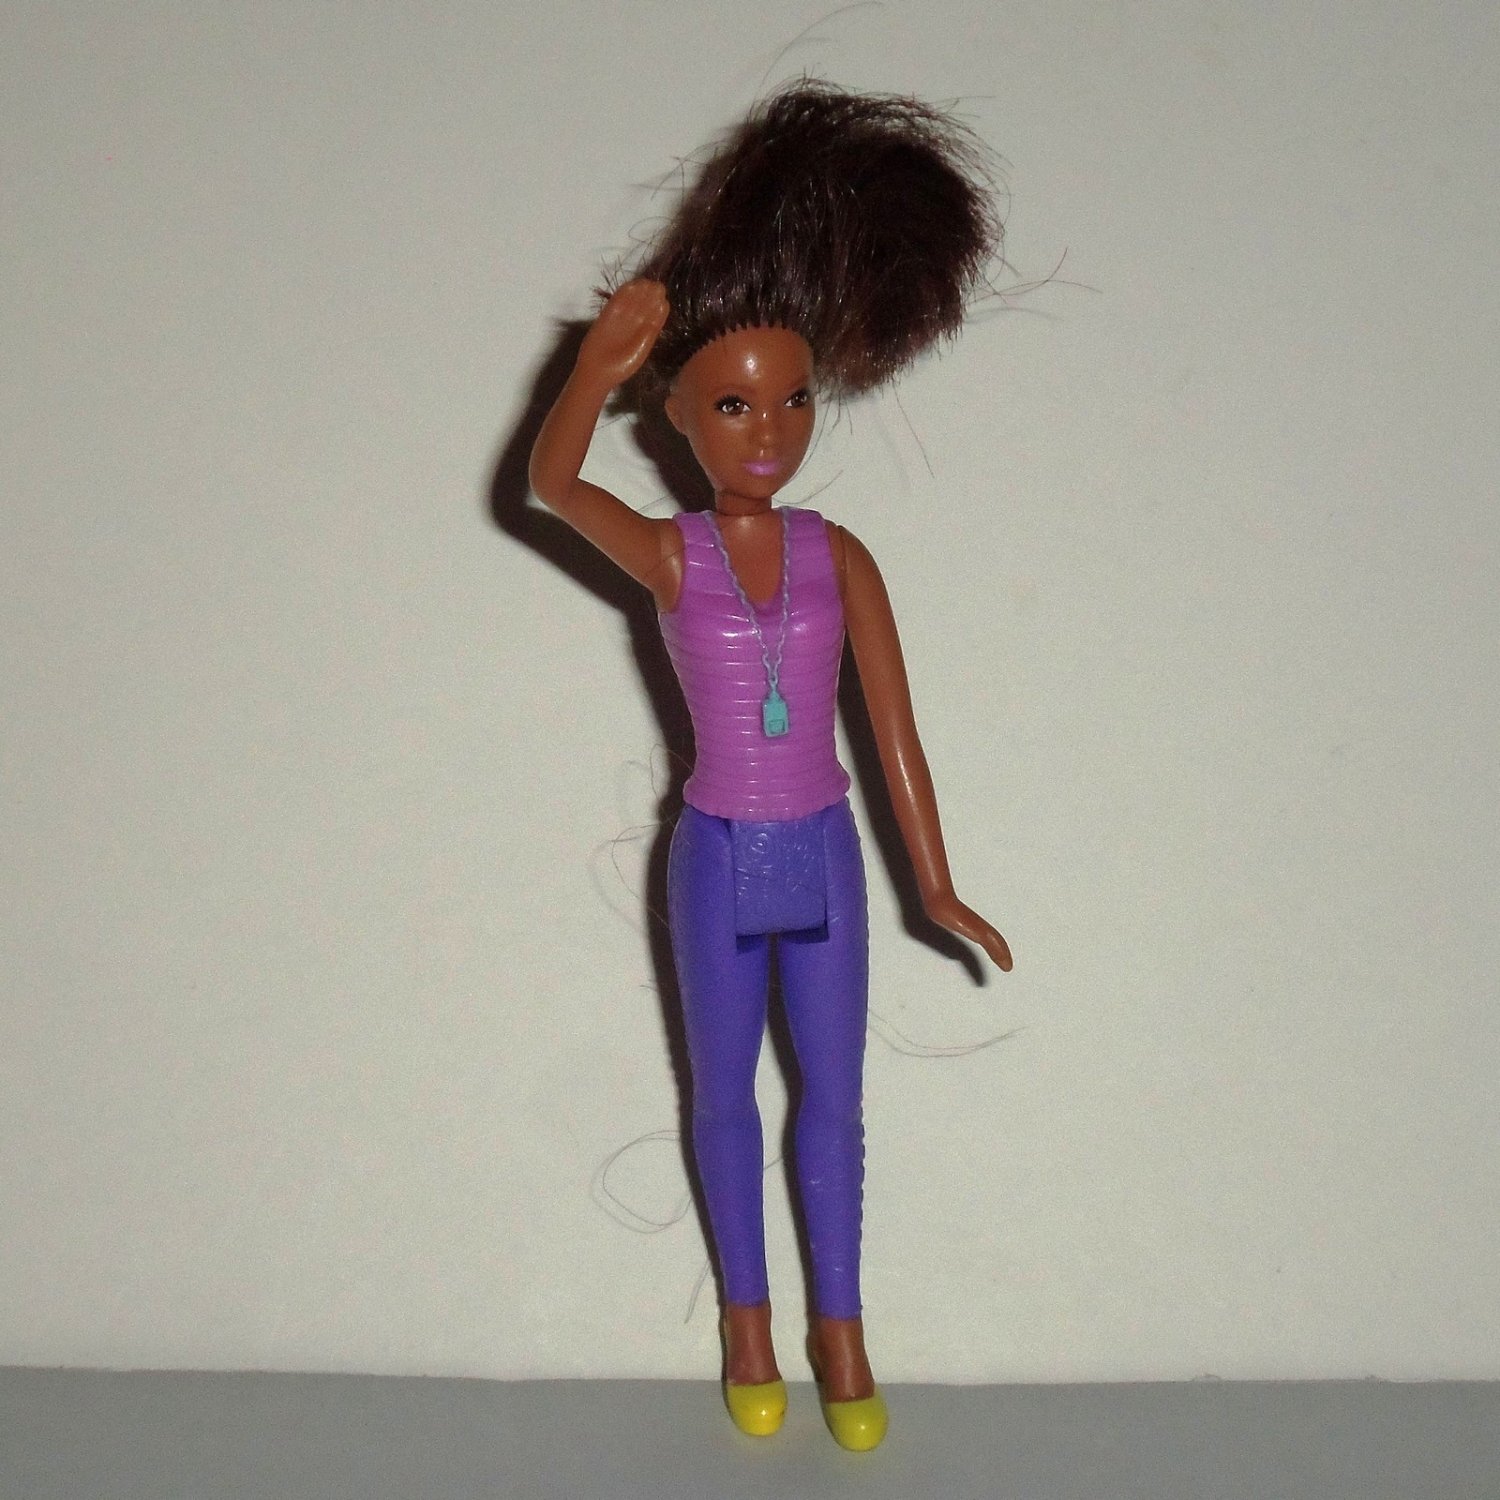 Nikki Life in the Dreamhouse Barbie Toy McDonalds Happy Meal #3 Mattel 2015 NEW 